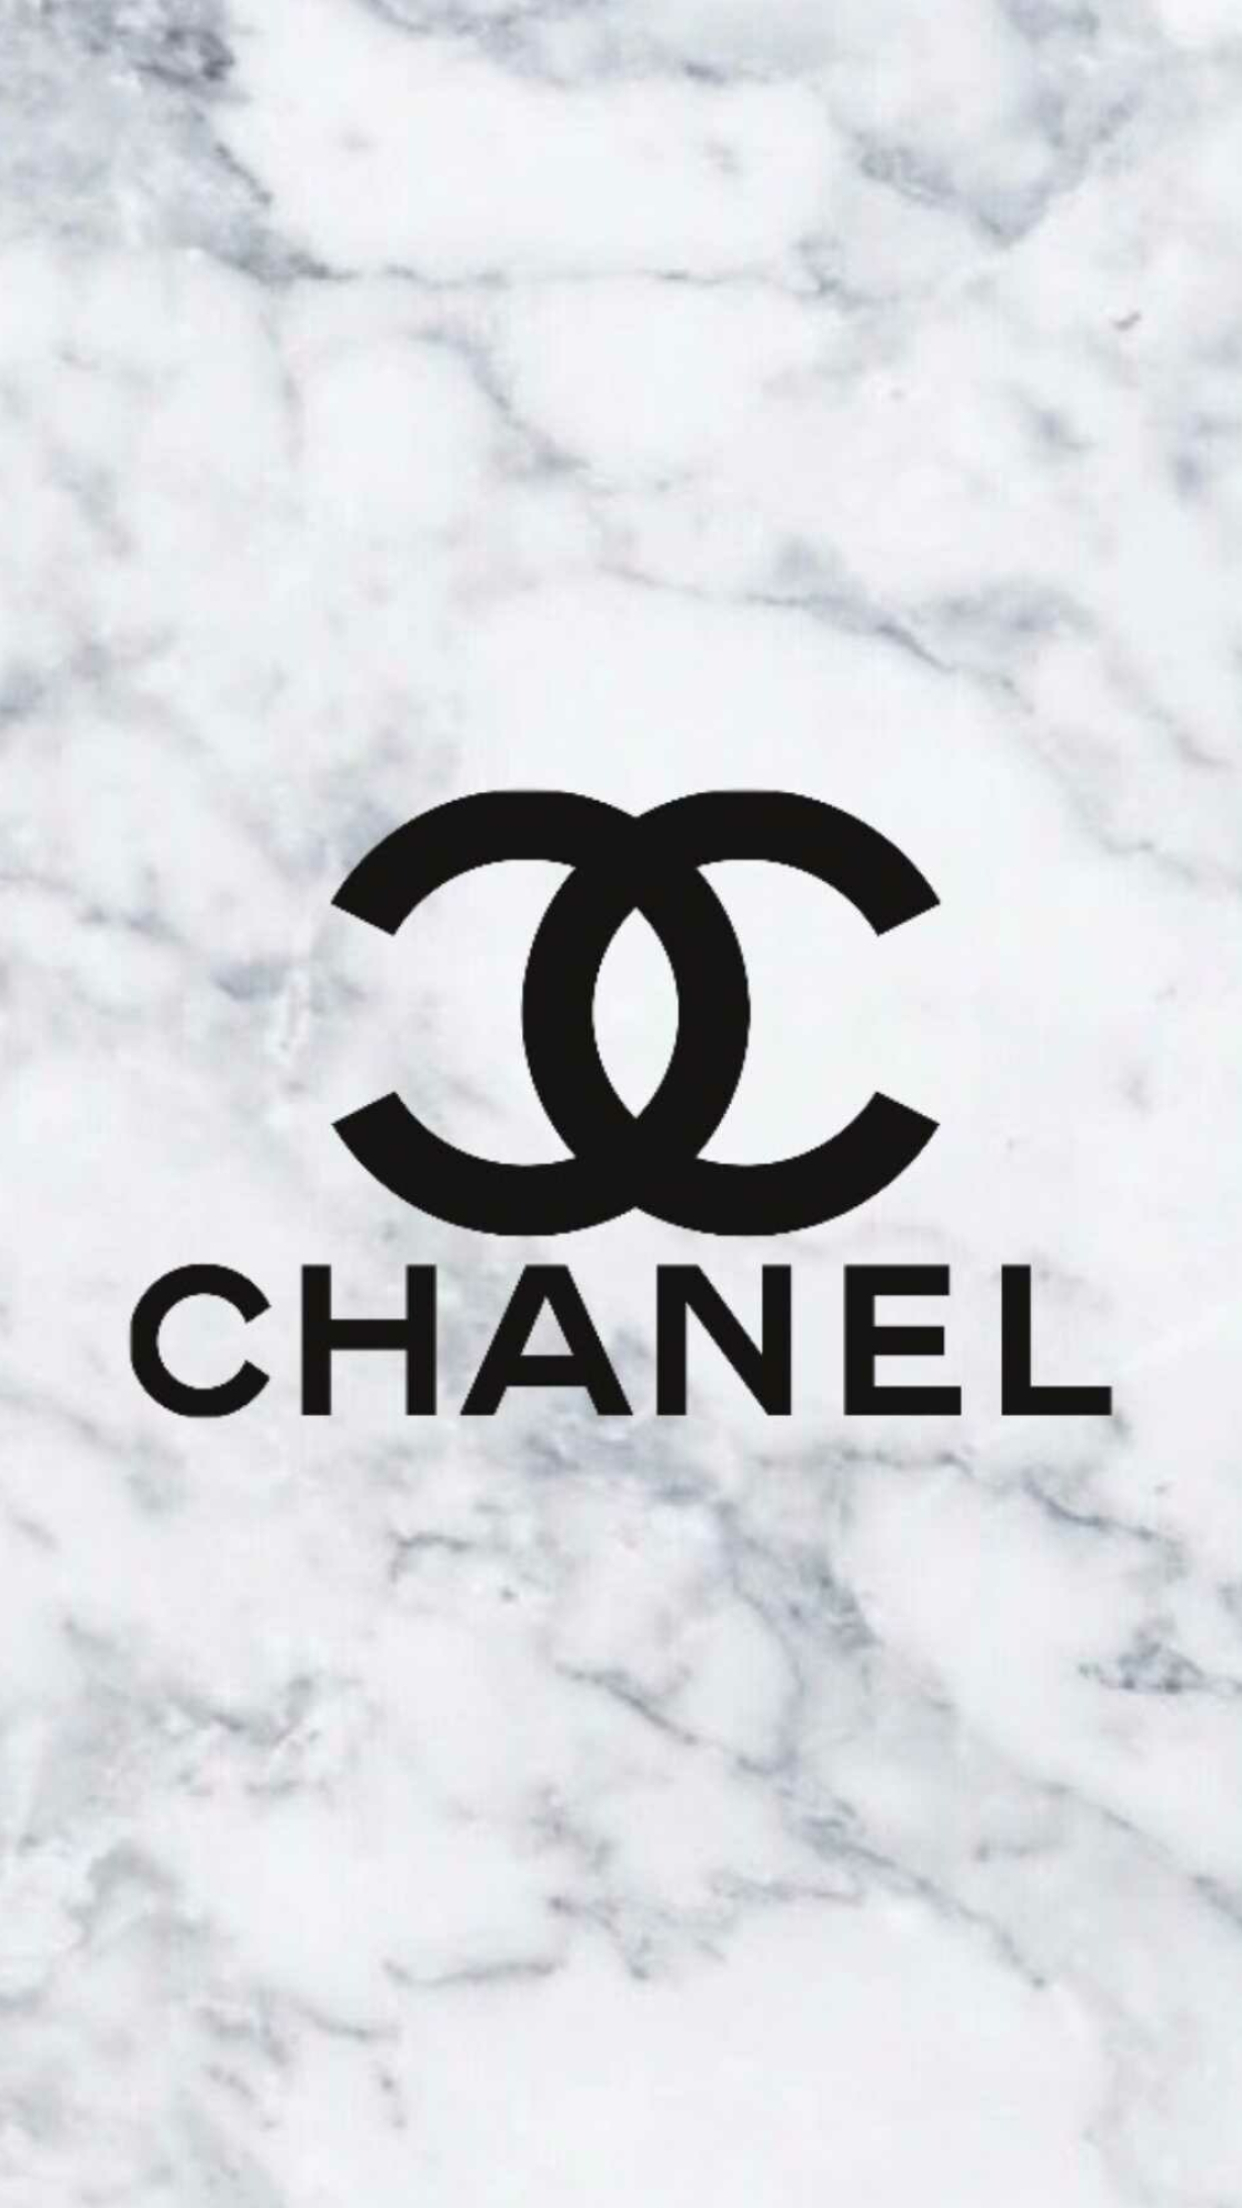 Chanel: A French designer brand that specializes in haute couture and ready-to-wear clothes. 1250x2210 HD Wallpaper.